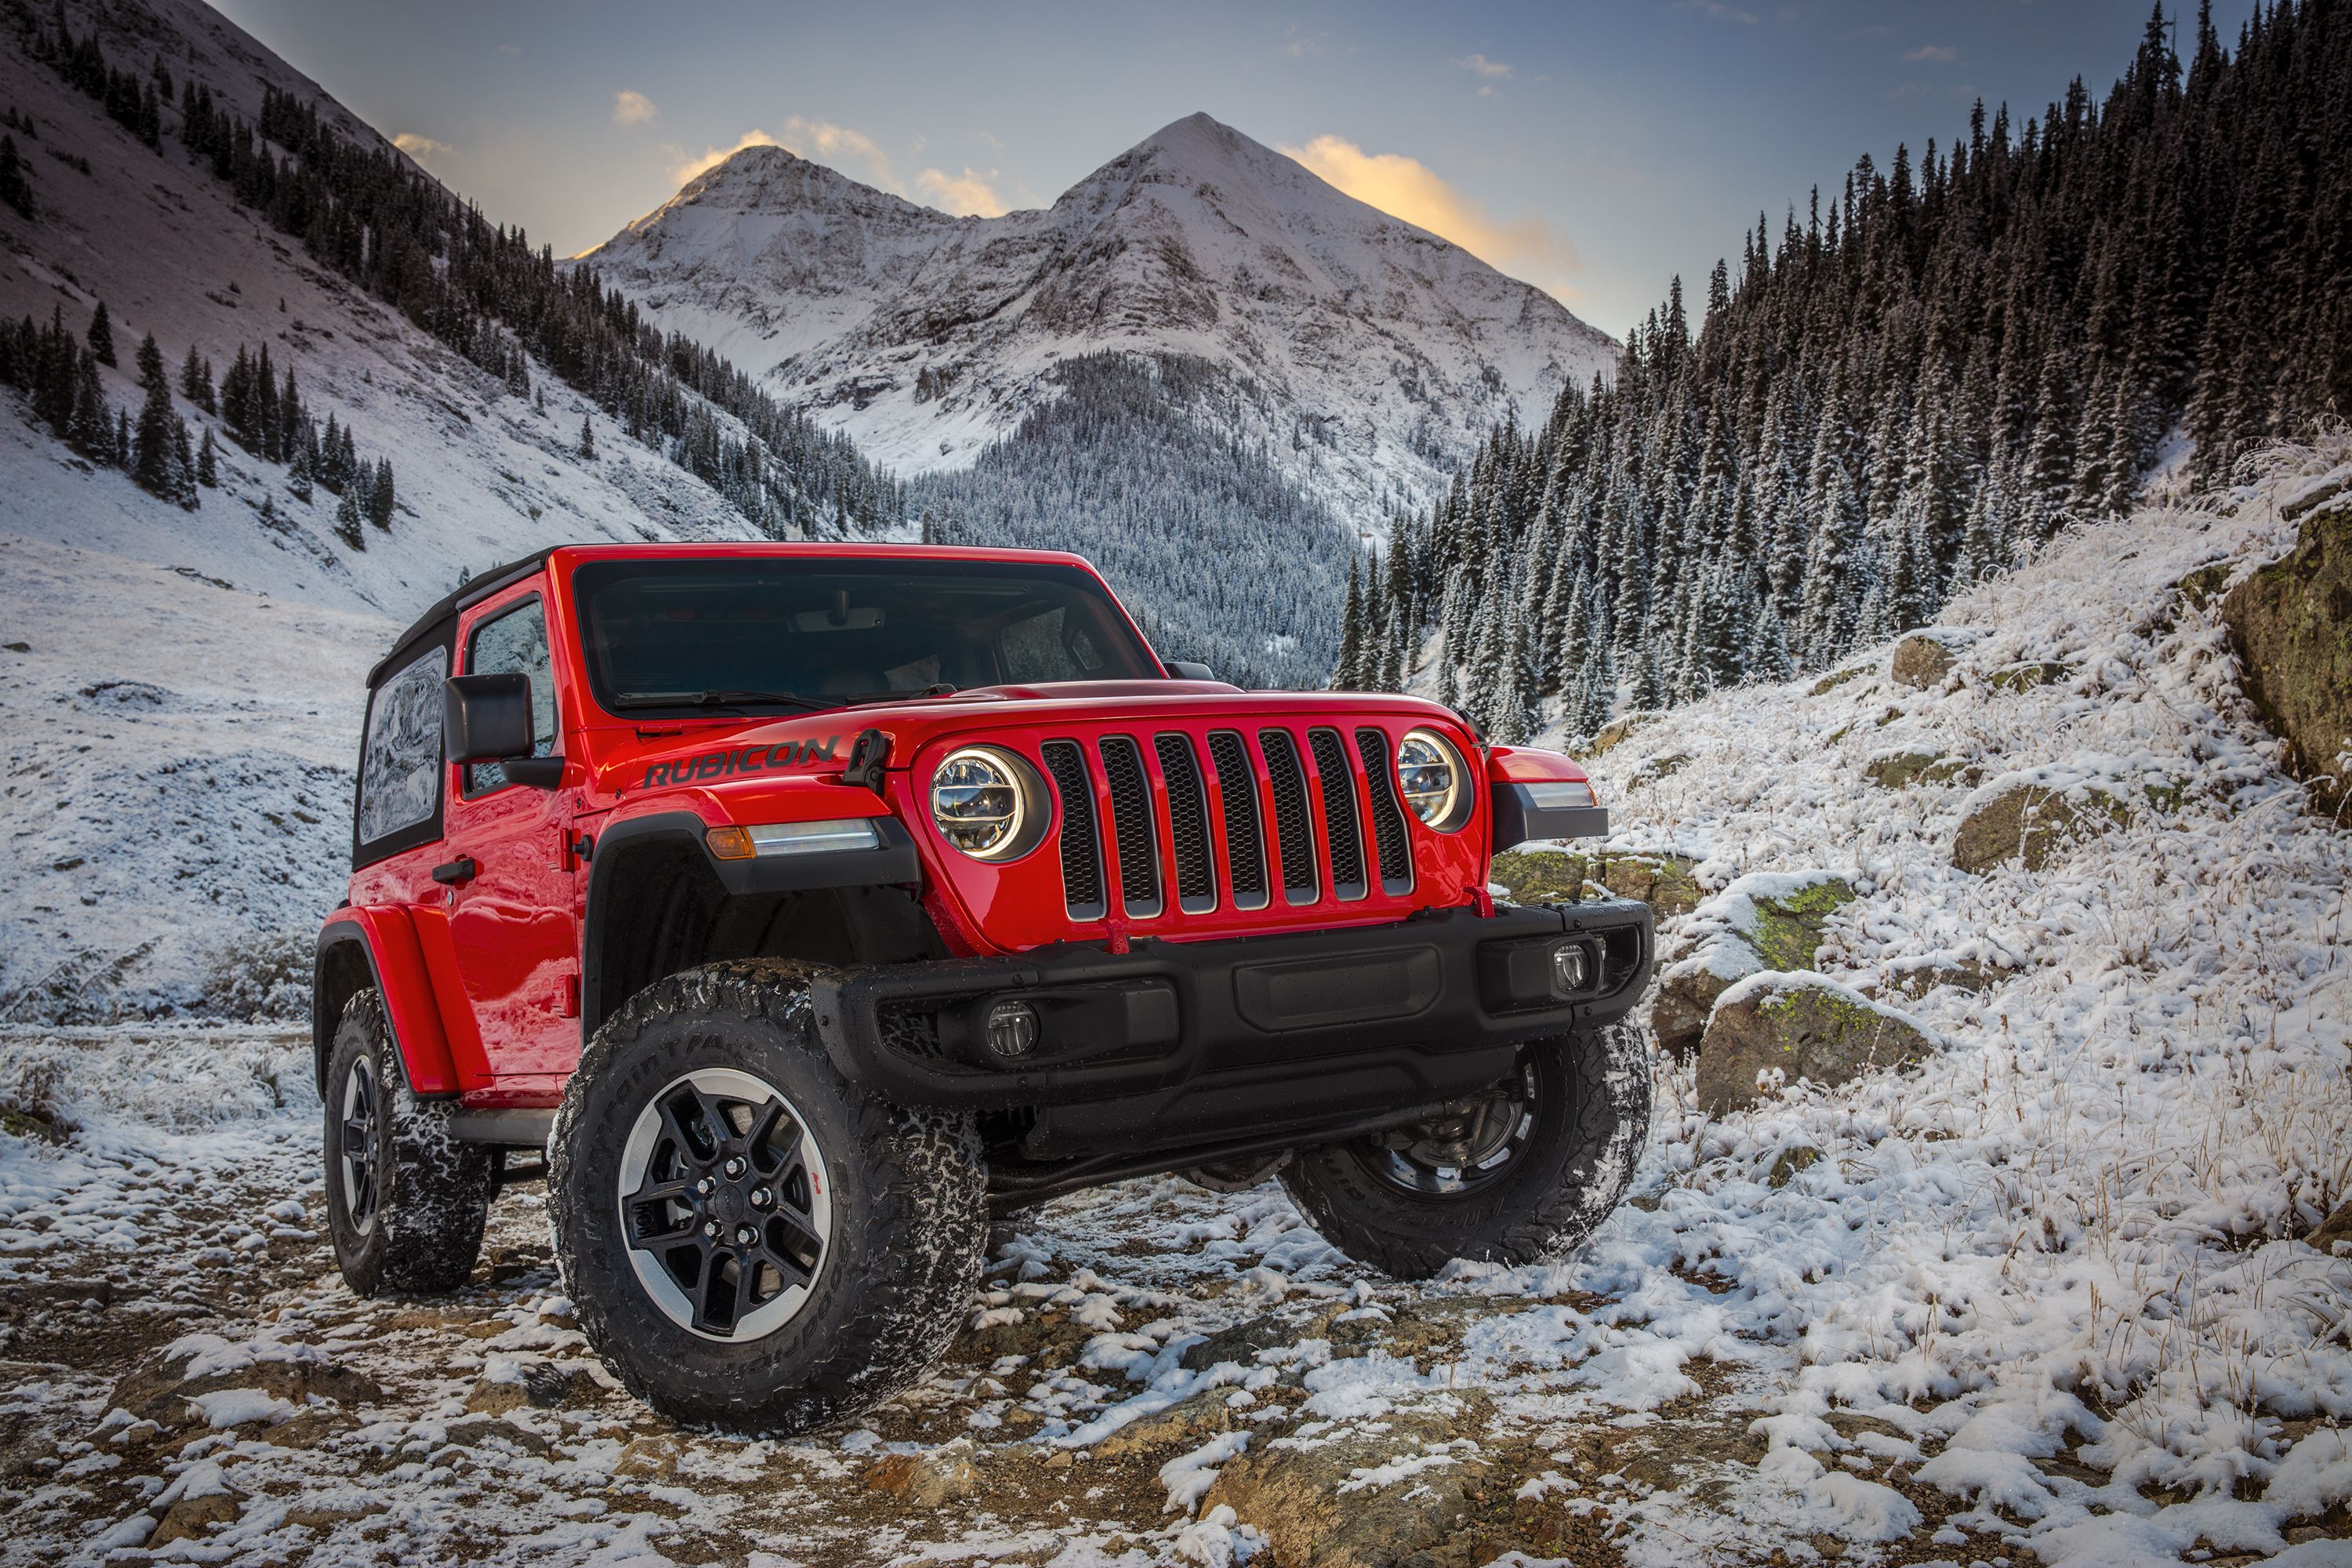 2018 Jeep Wrangler Official Specs From LA Auto Show 2017 - New JL Rubicon  Features